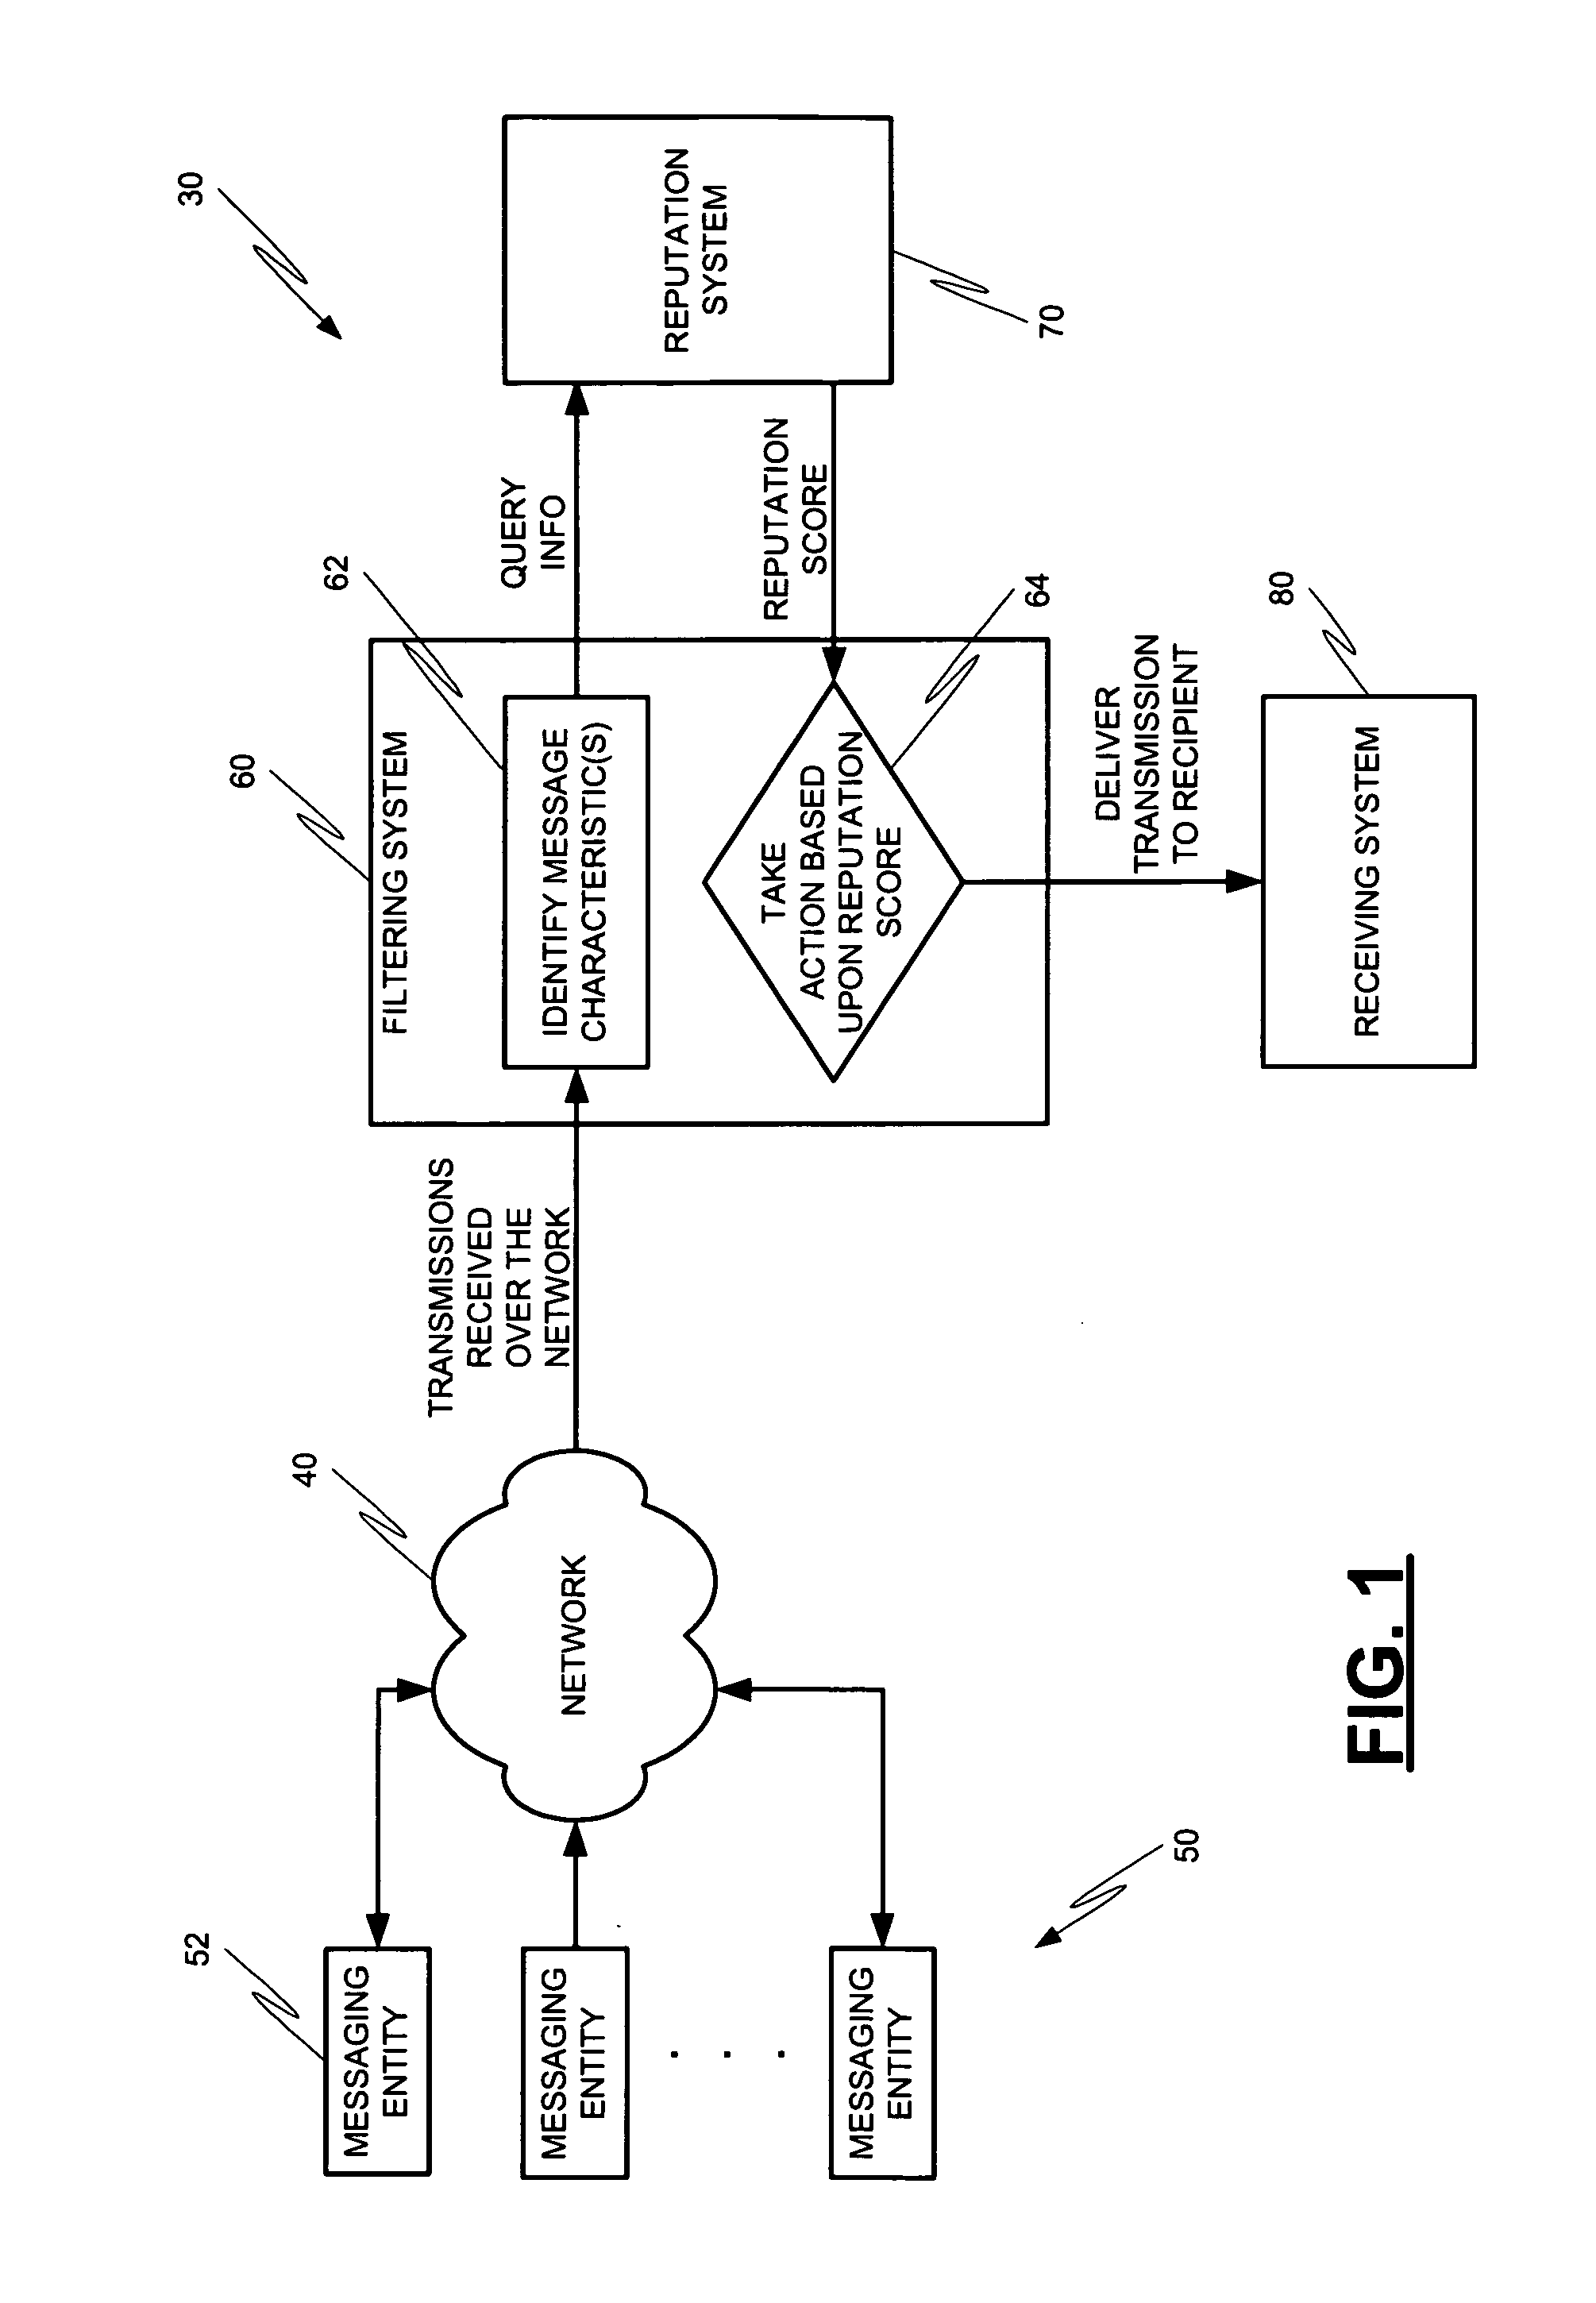 Systems and methods for classification of messaging entities